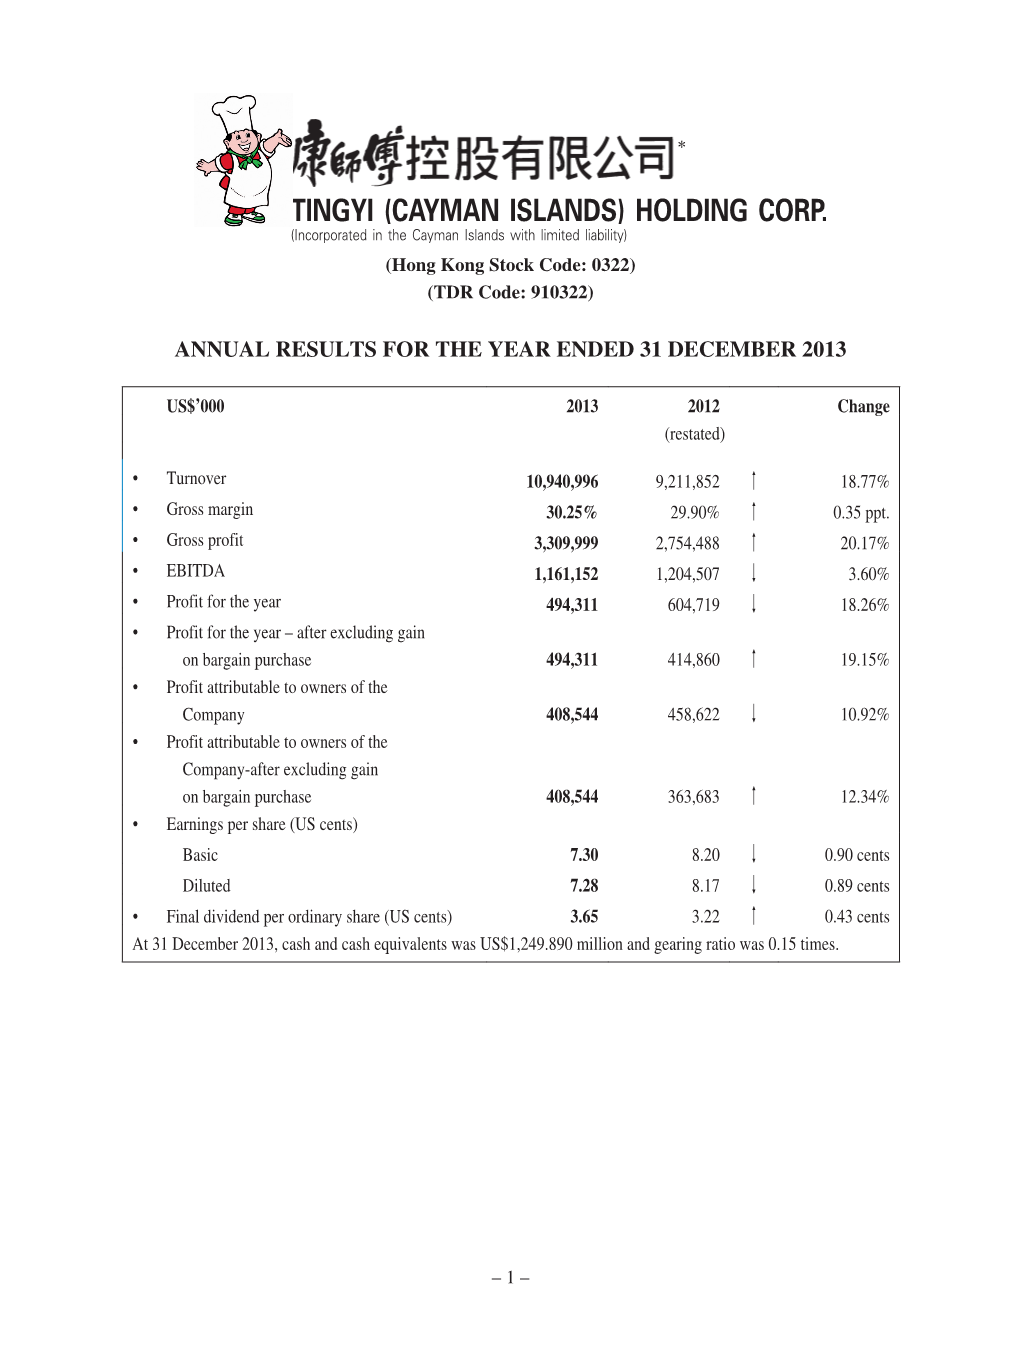 Annual Results for the Year Ended 31 December 2013